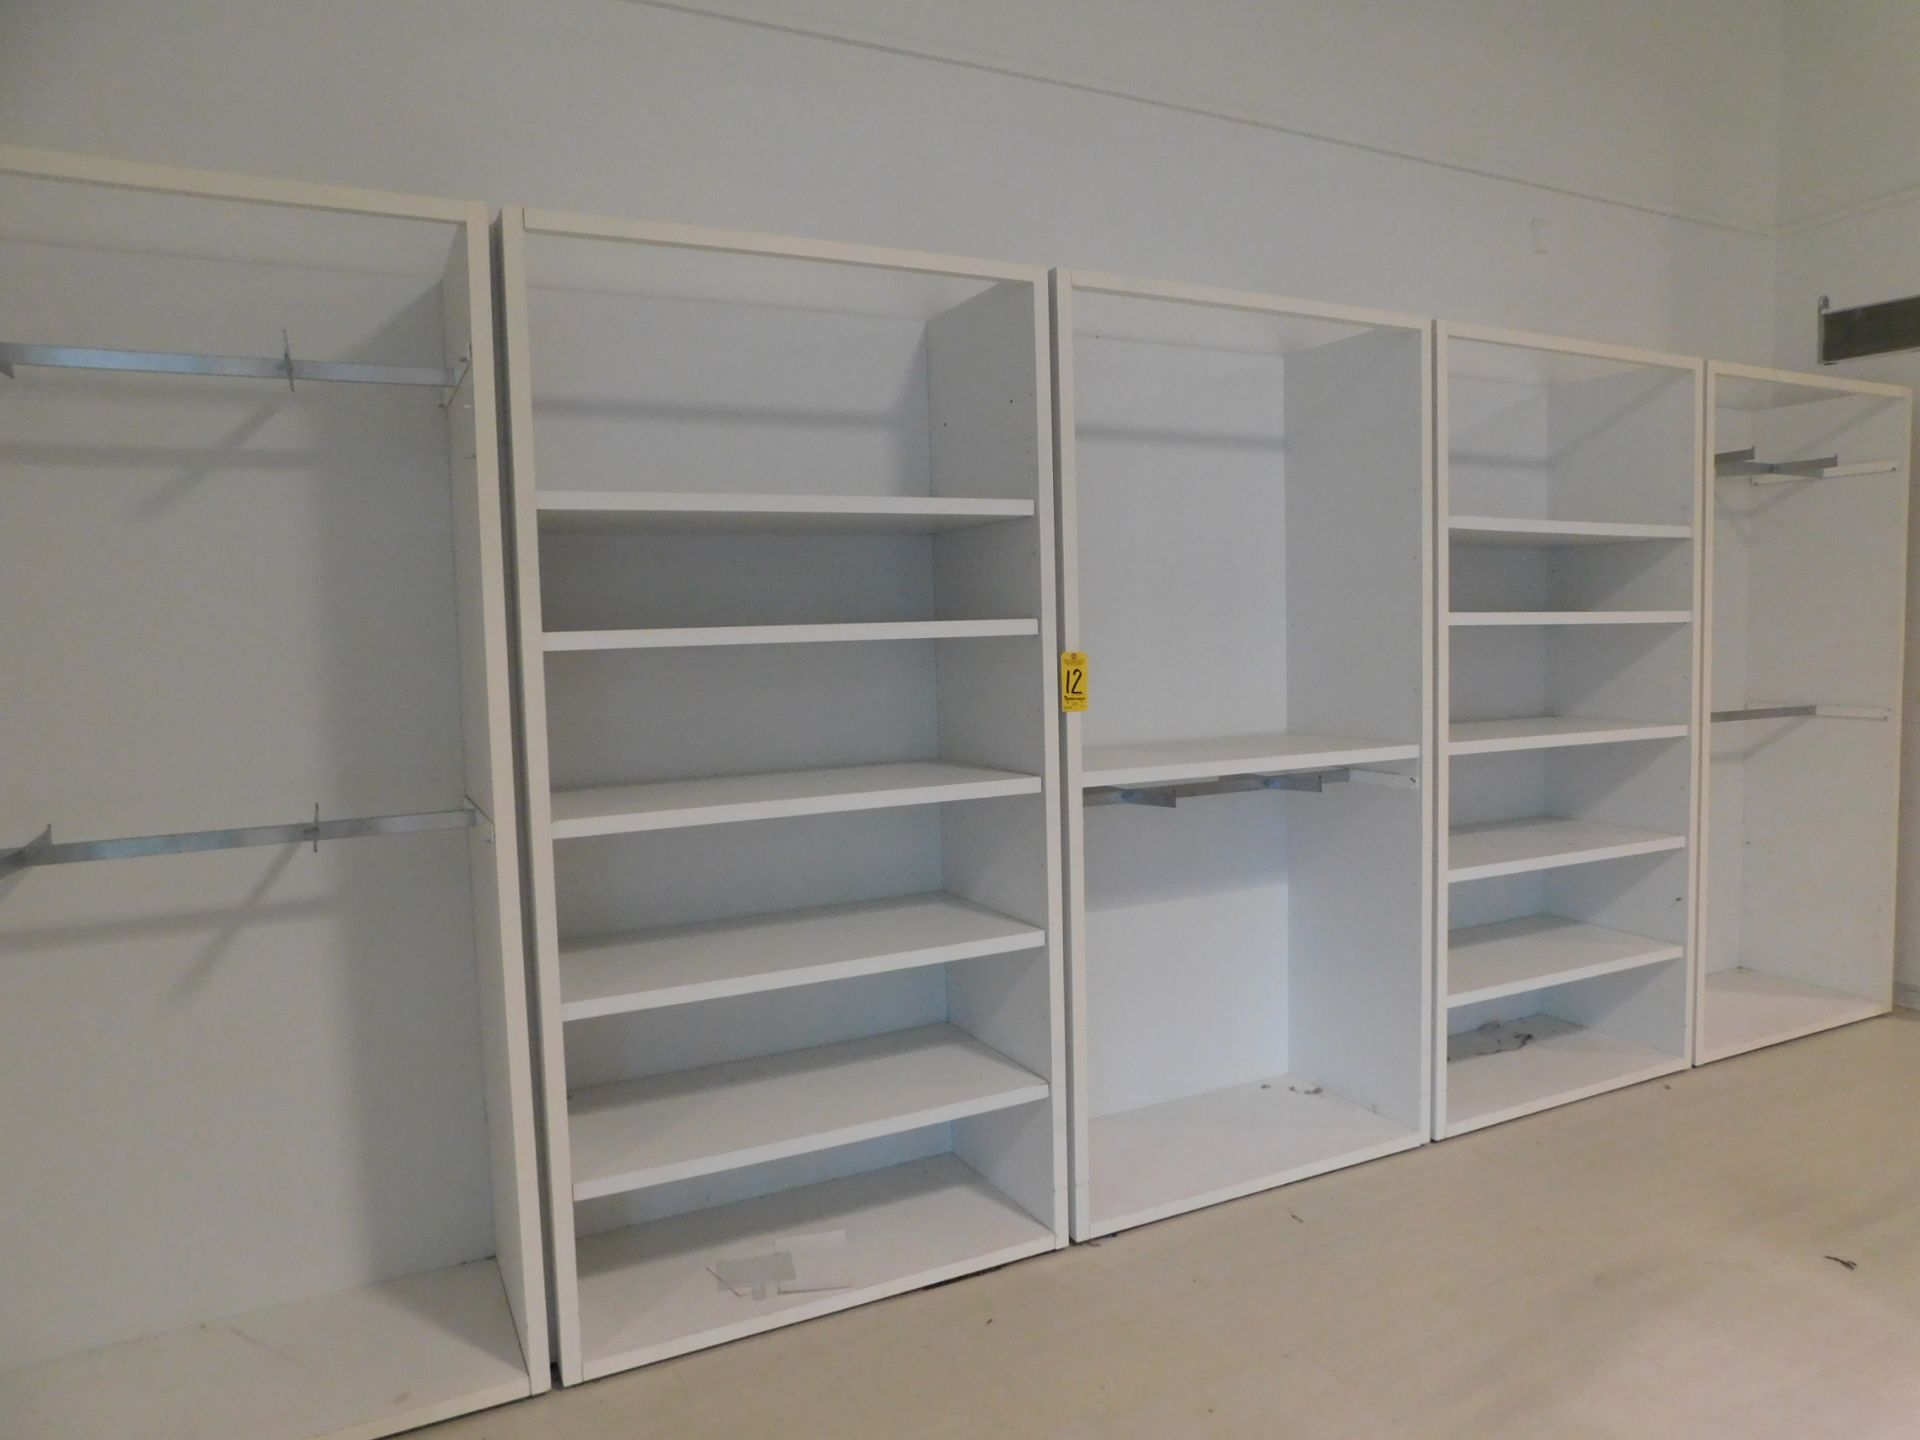 (5) Shelving and Displays, 49" W x 24" D x 8" H